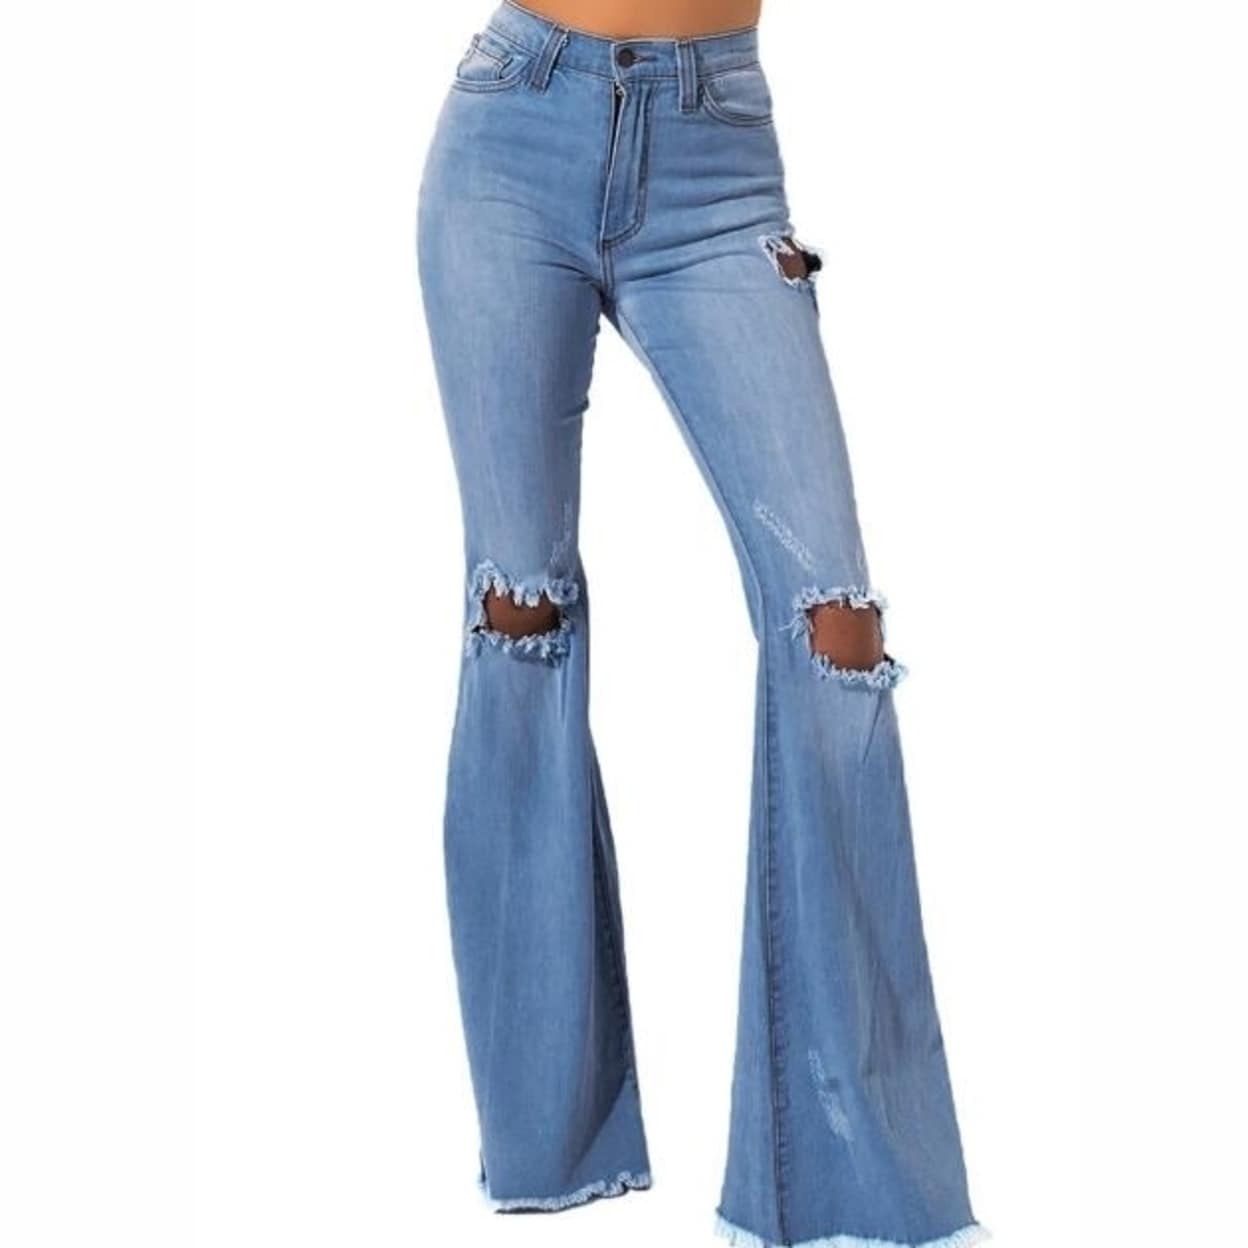 jeans with elastic at bottom